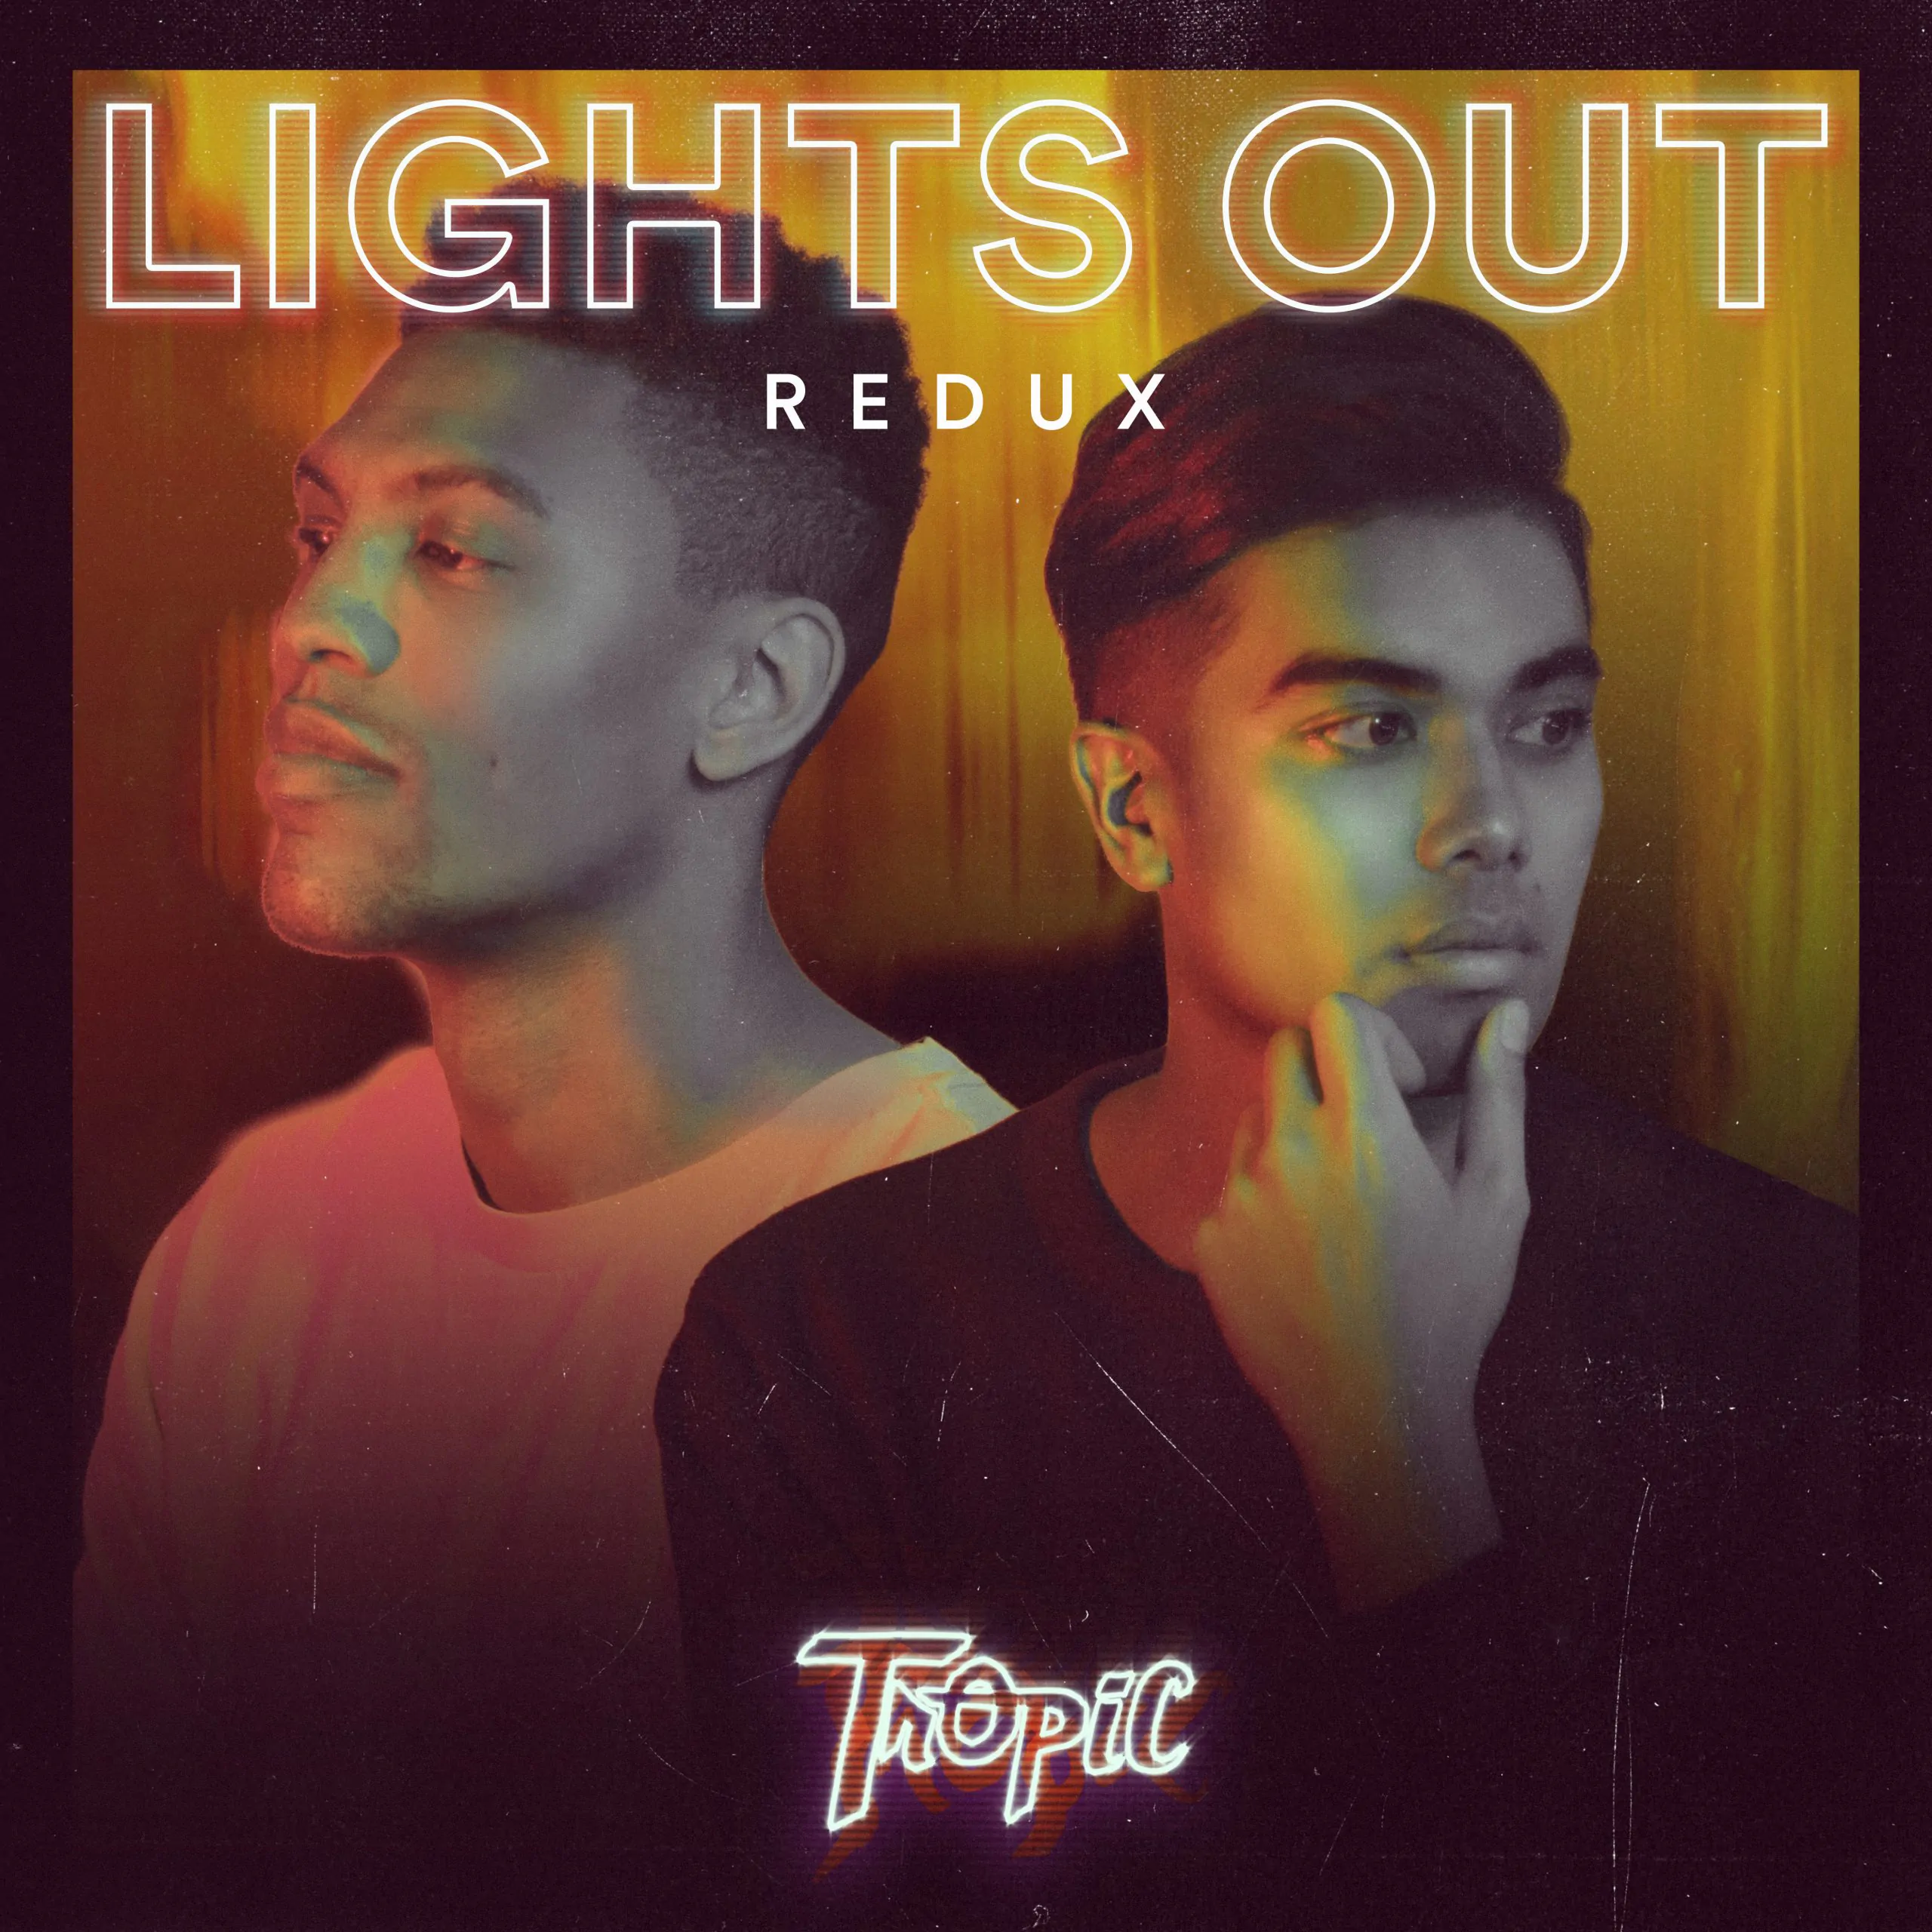 TRACK PREMIERE: Tropic - Lights Out (Redux) 